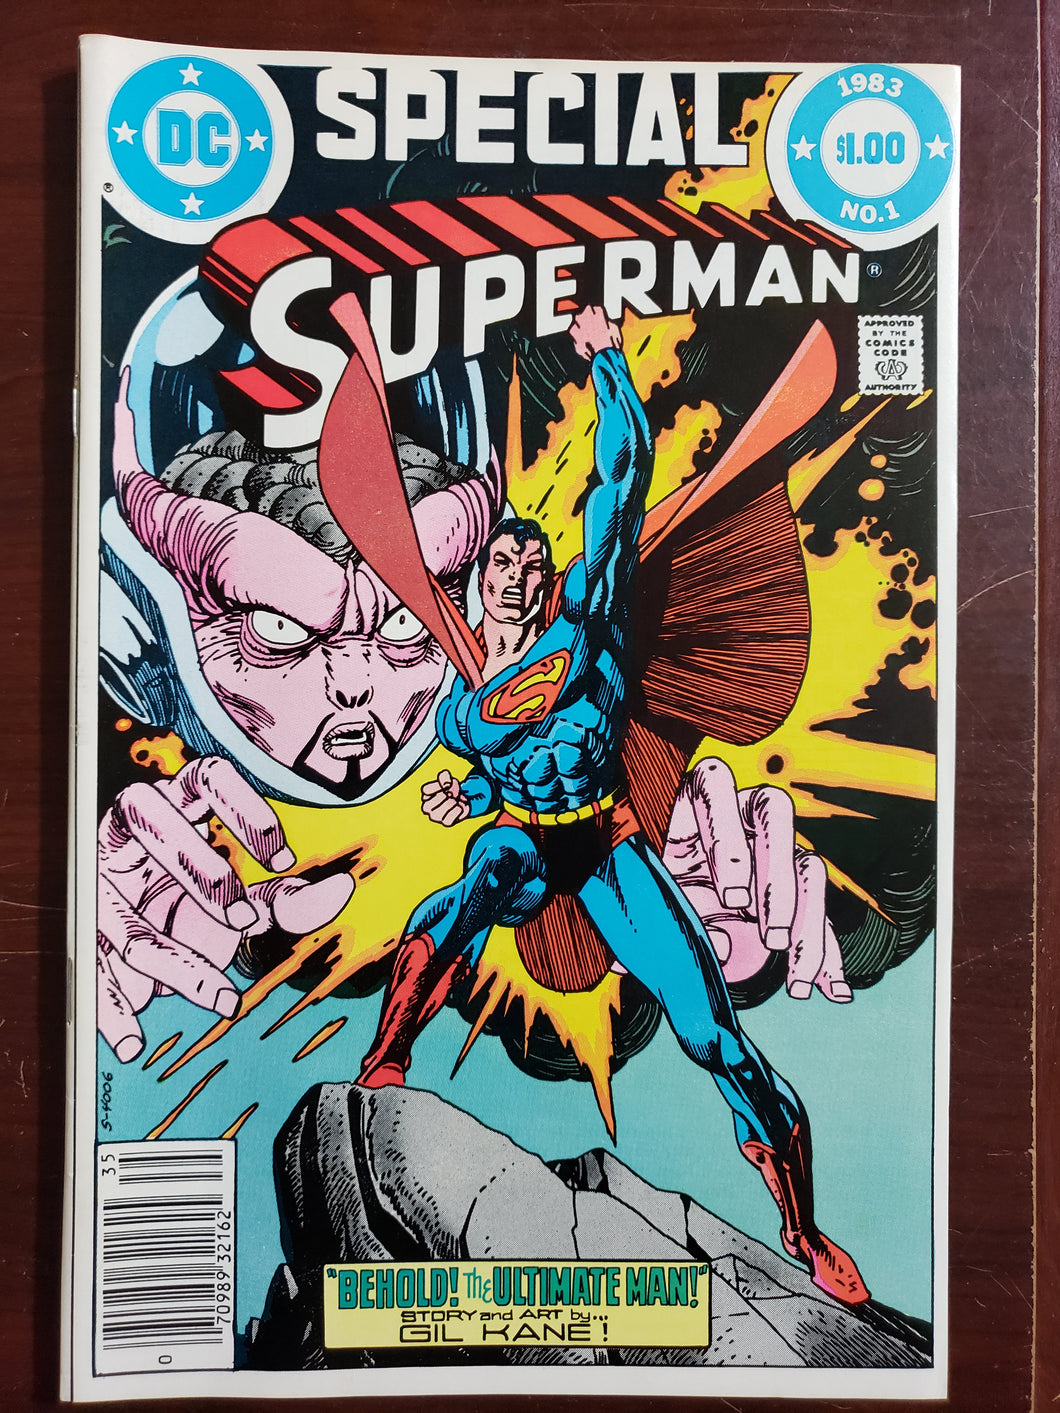 Superman Special #1 (DC Comics, 1983) Gil Kane Story and Art VG/VF, Ultimate Man